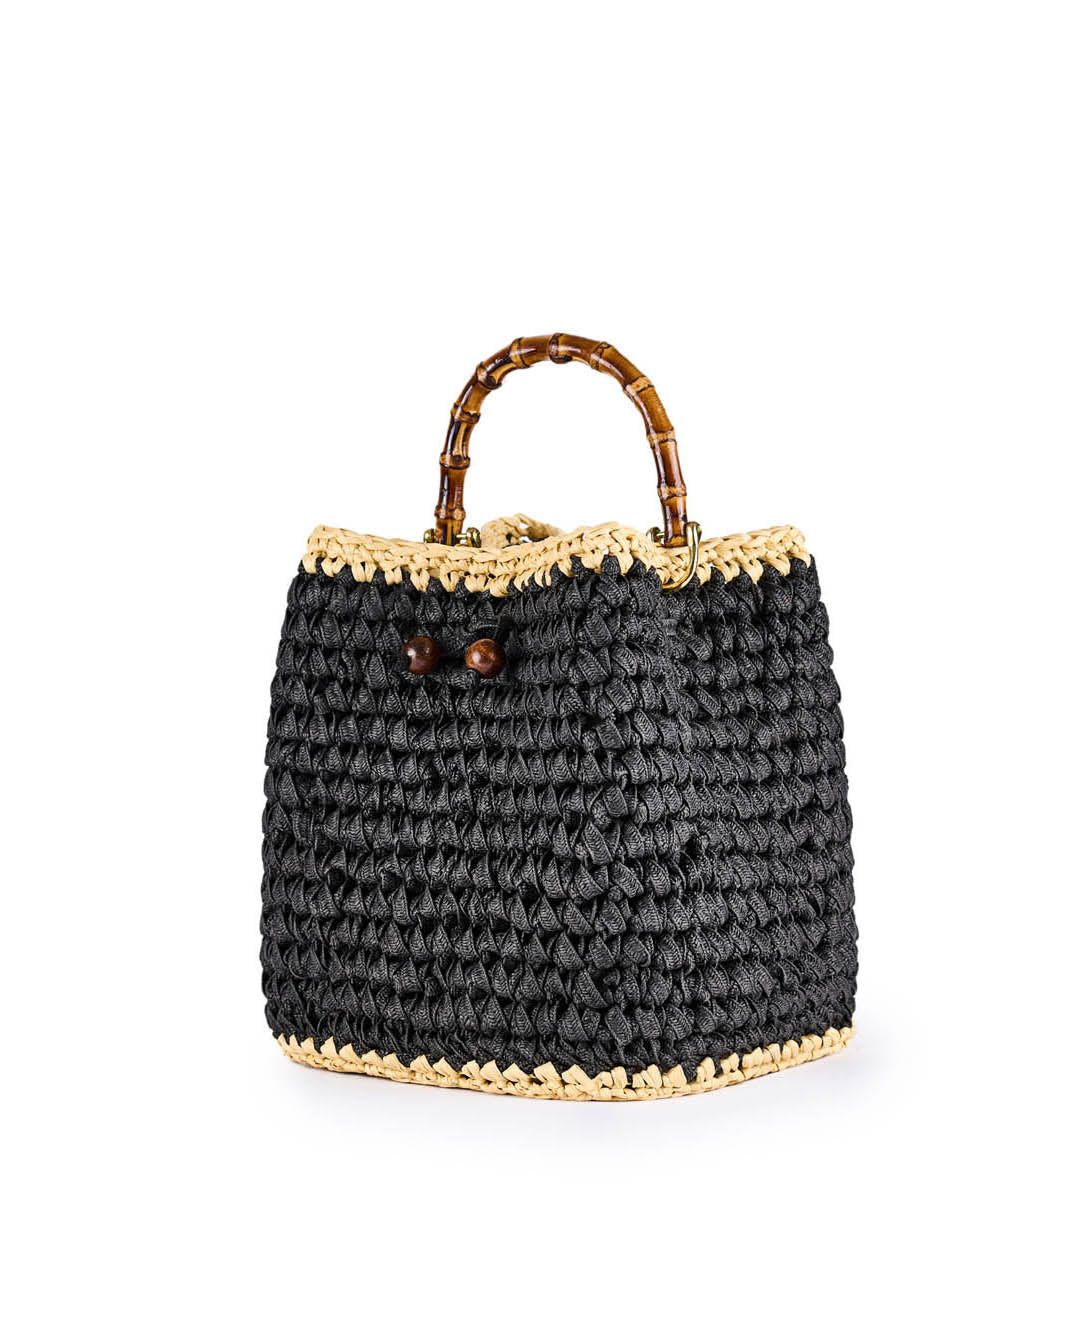 Black woven handbag with bamboo handles and beige trim